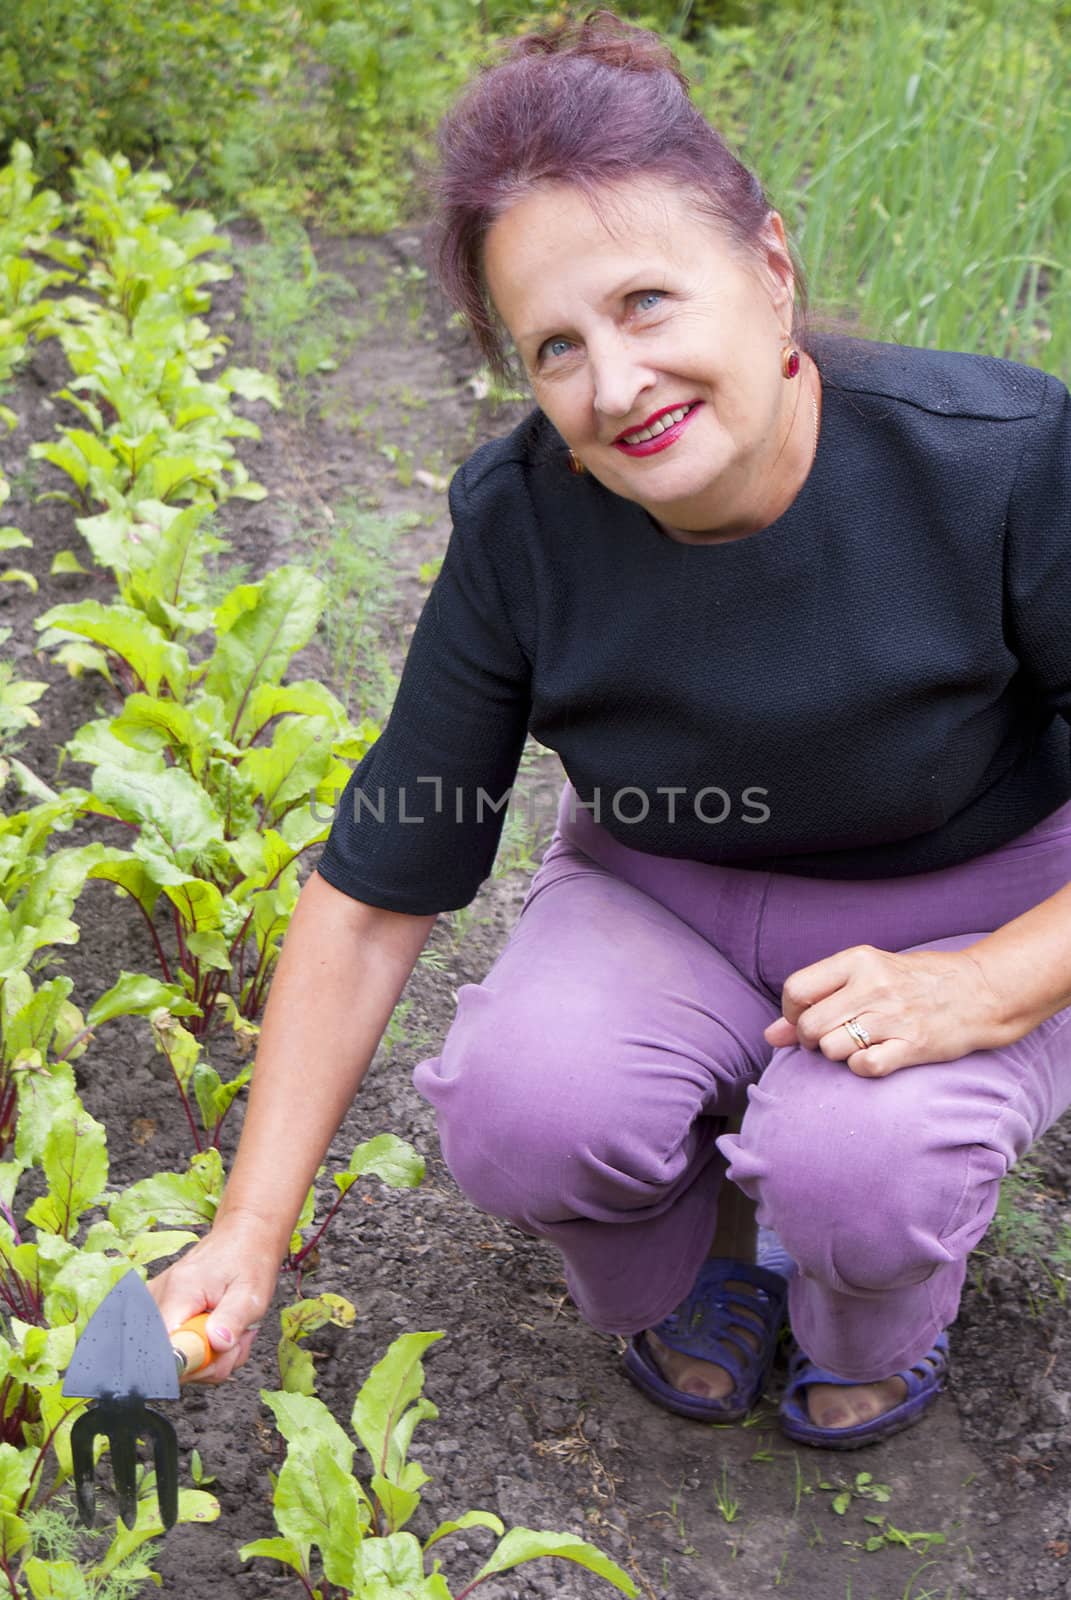 The happy smiling woman works on a garden site